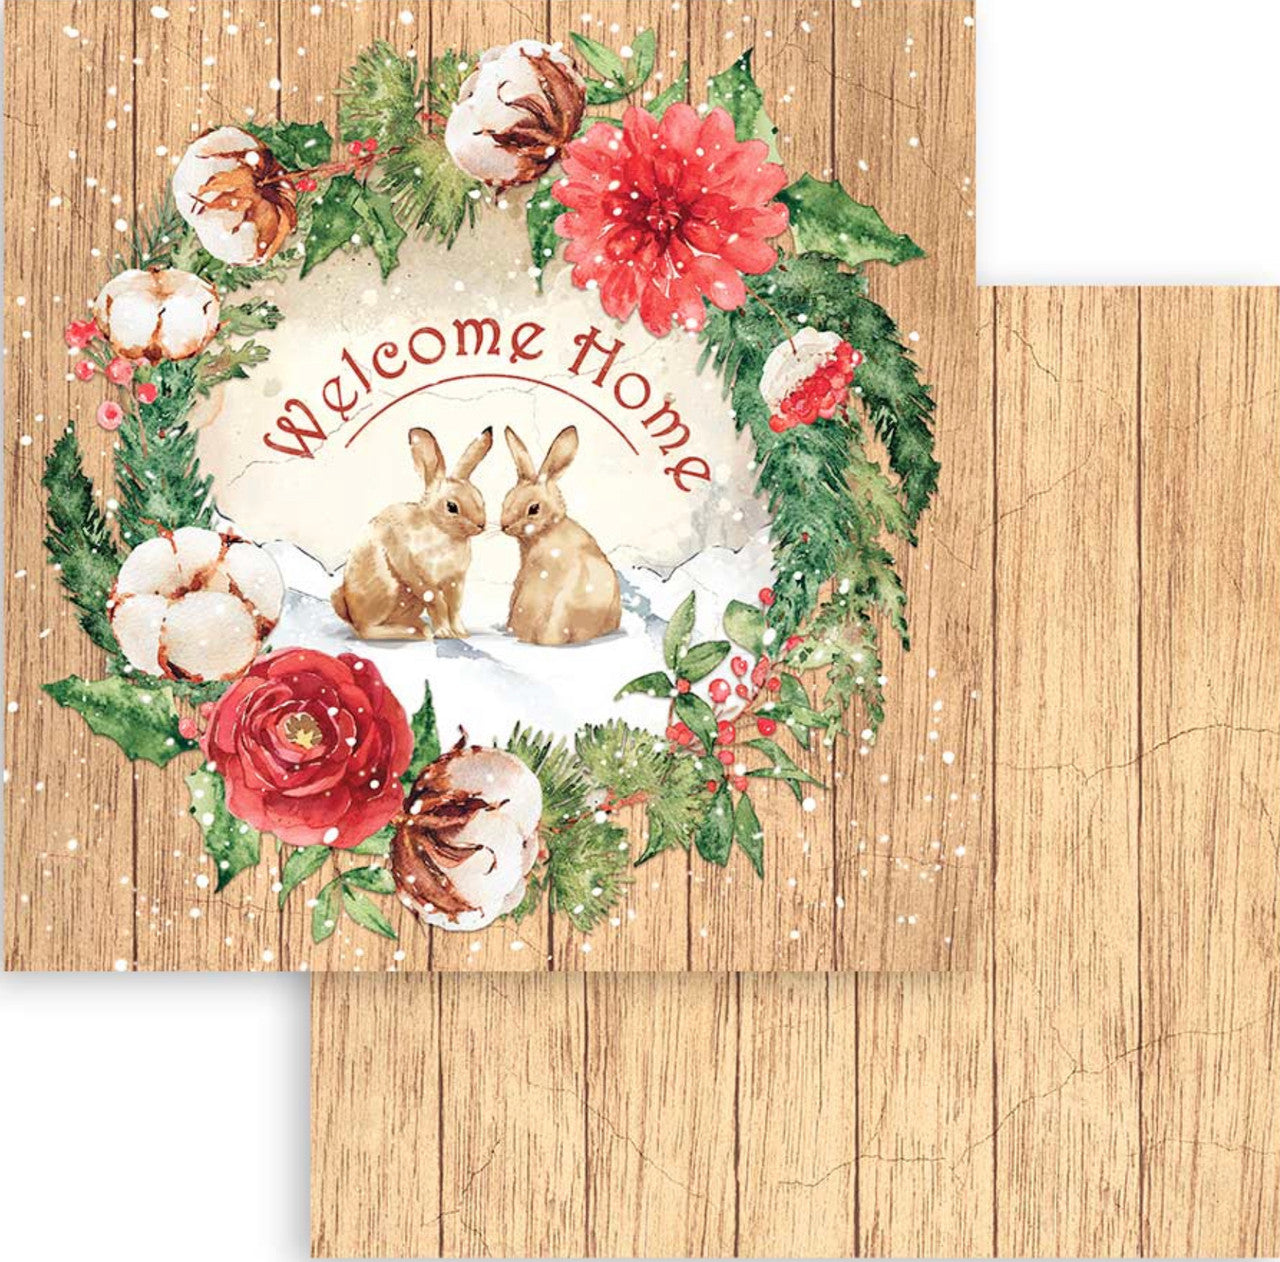 Stamperia Romantic Collection - Home for the Holidays 12” x 12” Paper Collection